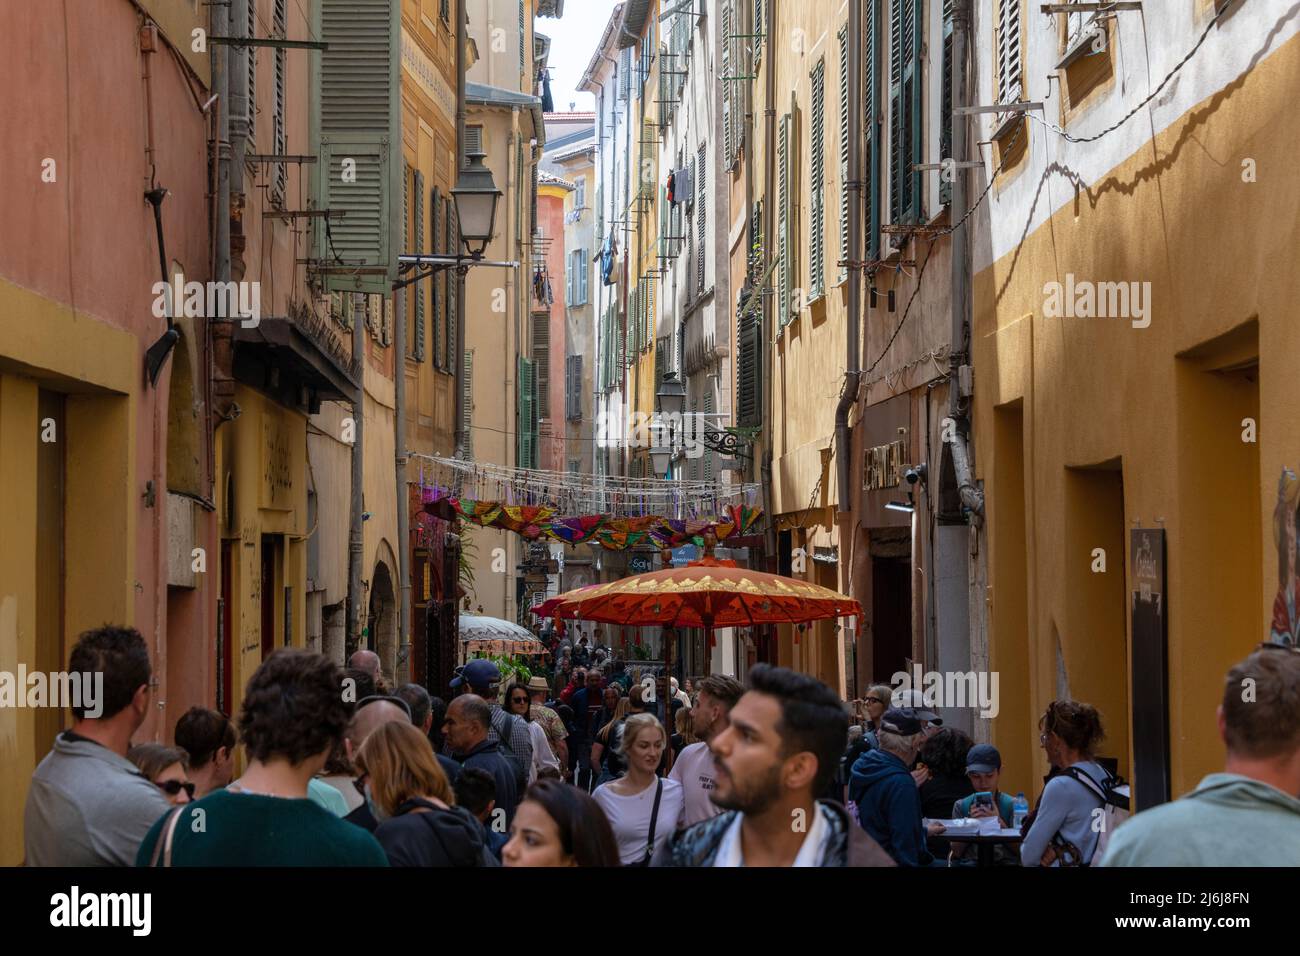 Crowds in a narrow street in Nice Old Town, France. Stock Photo